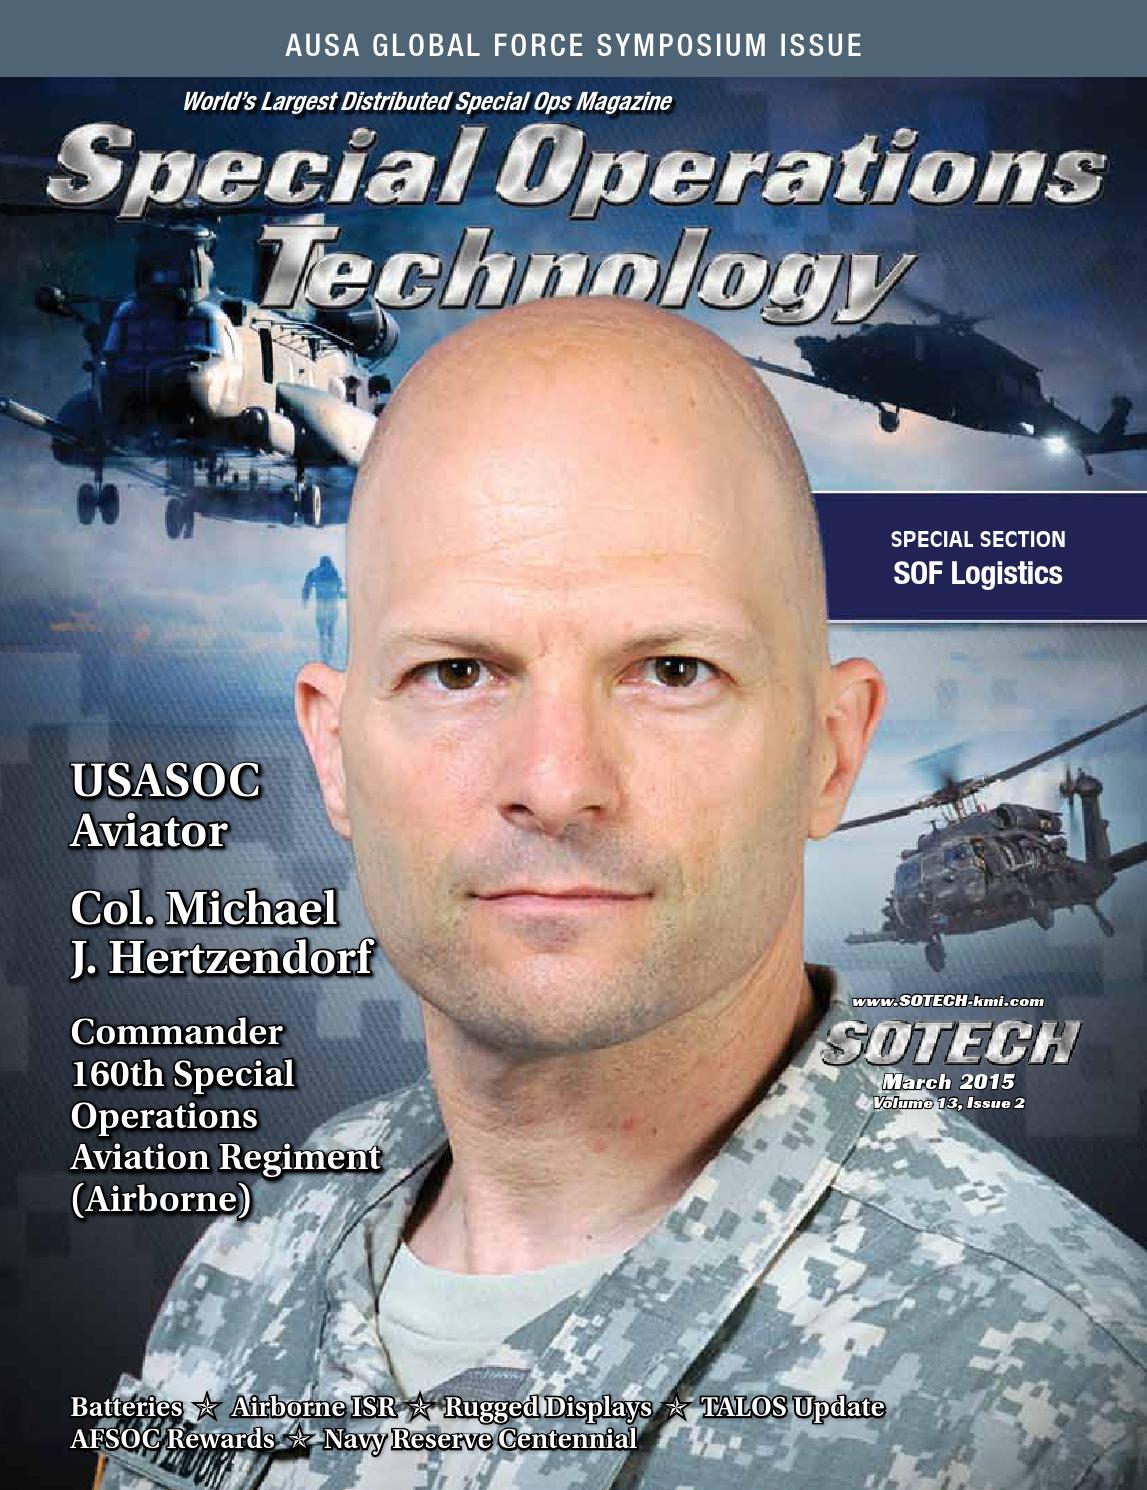 Michael J. Hertzendorf, CEO of NUAIR Alliance, and for Deputy Chief of Staff 18th Airborne Corps/Senior Director, U.S. Army (Courtesy of SOTECH)